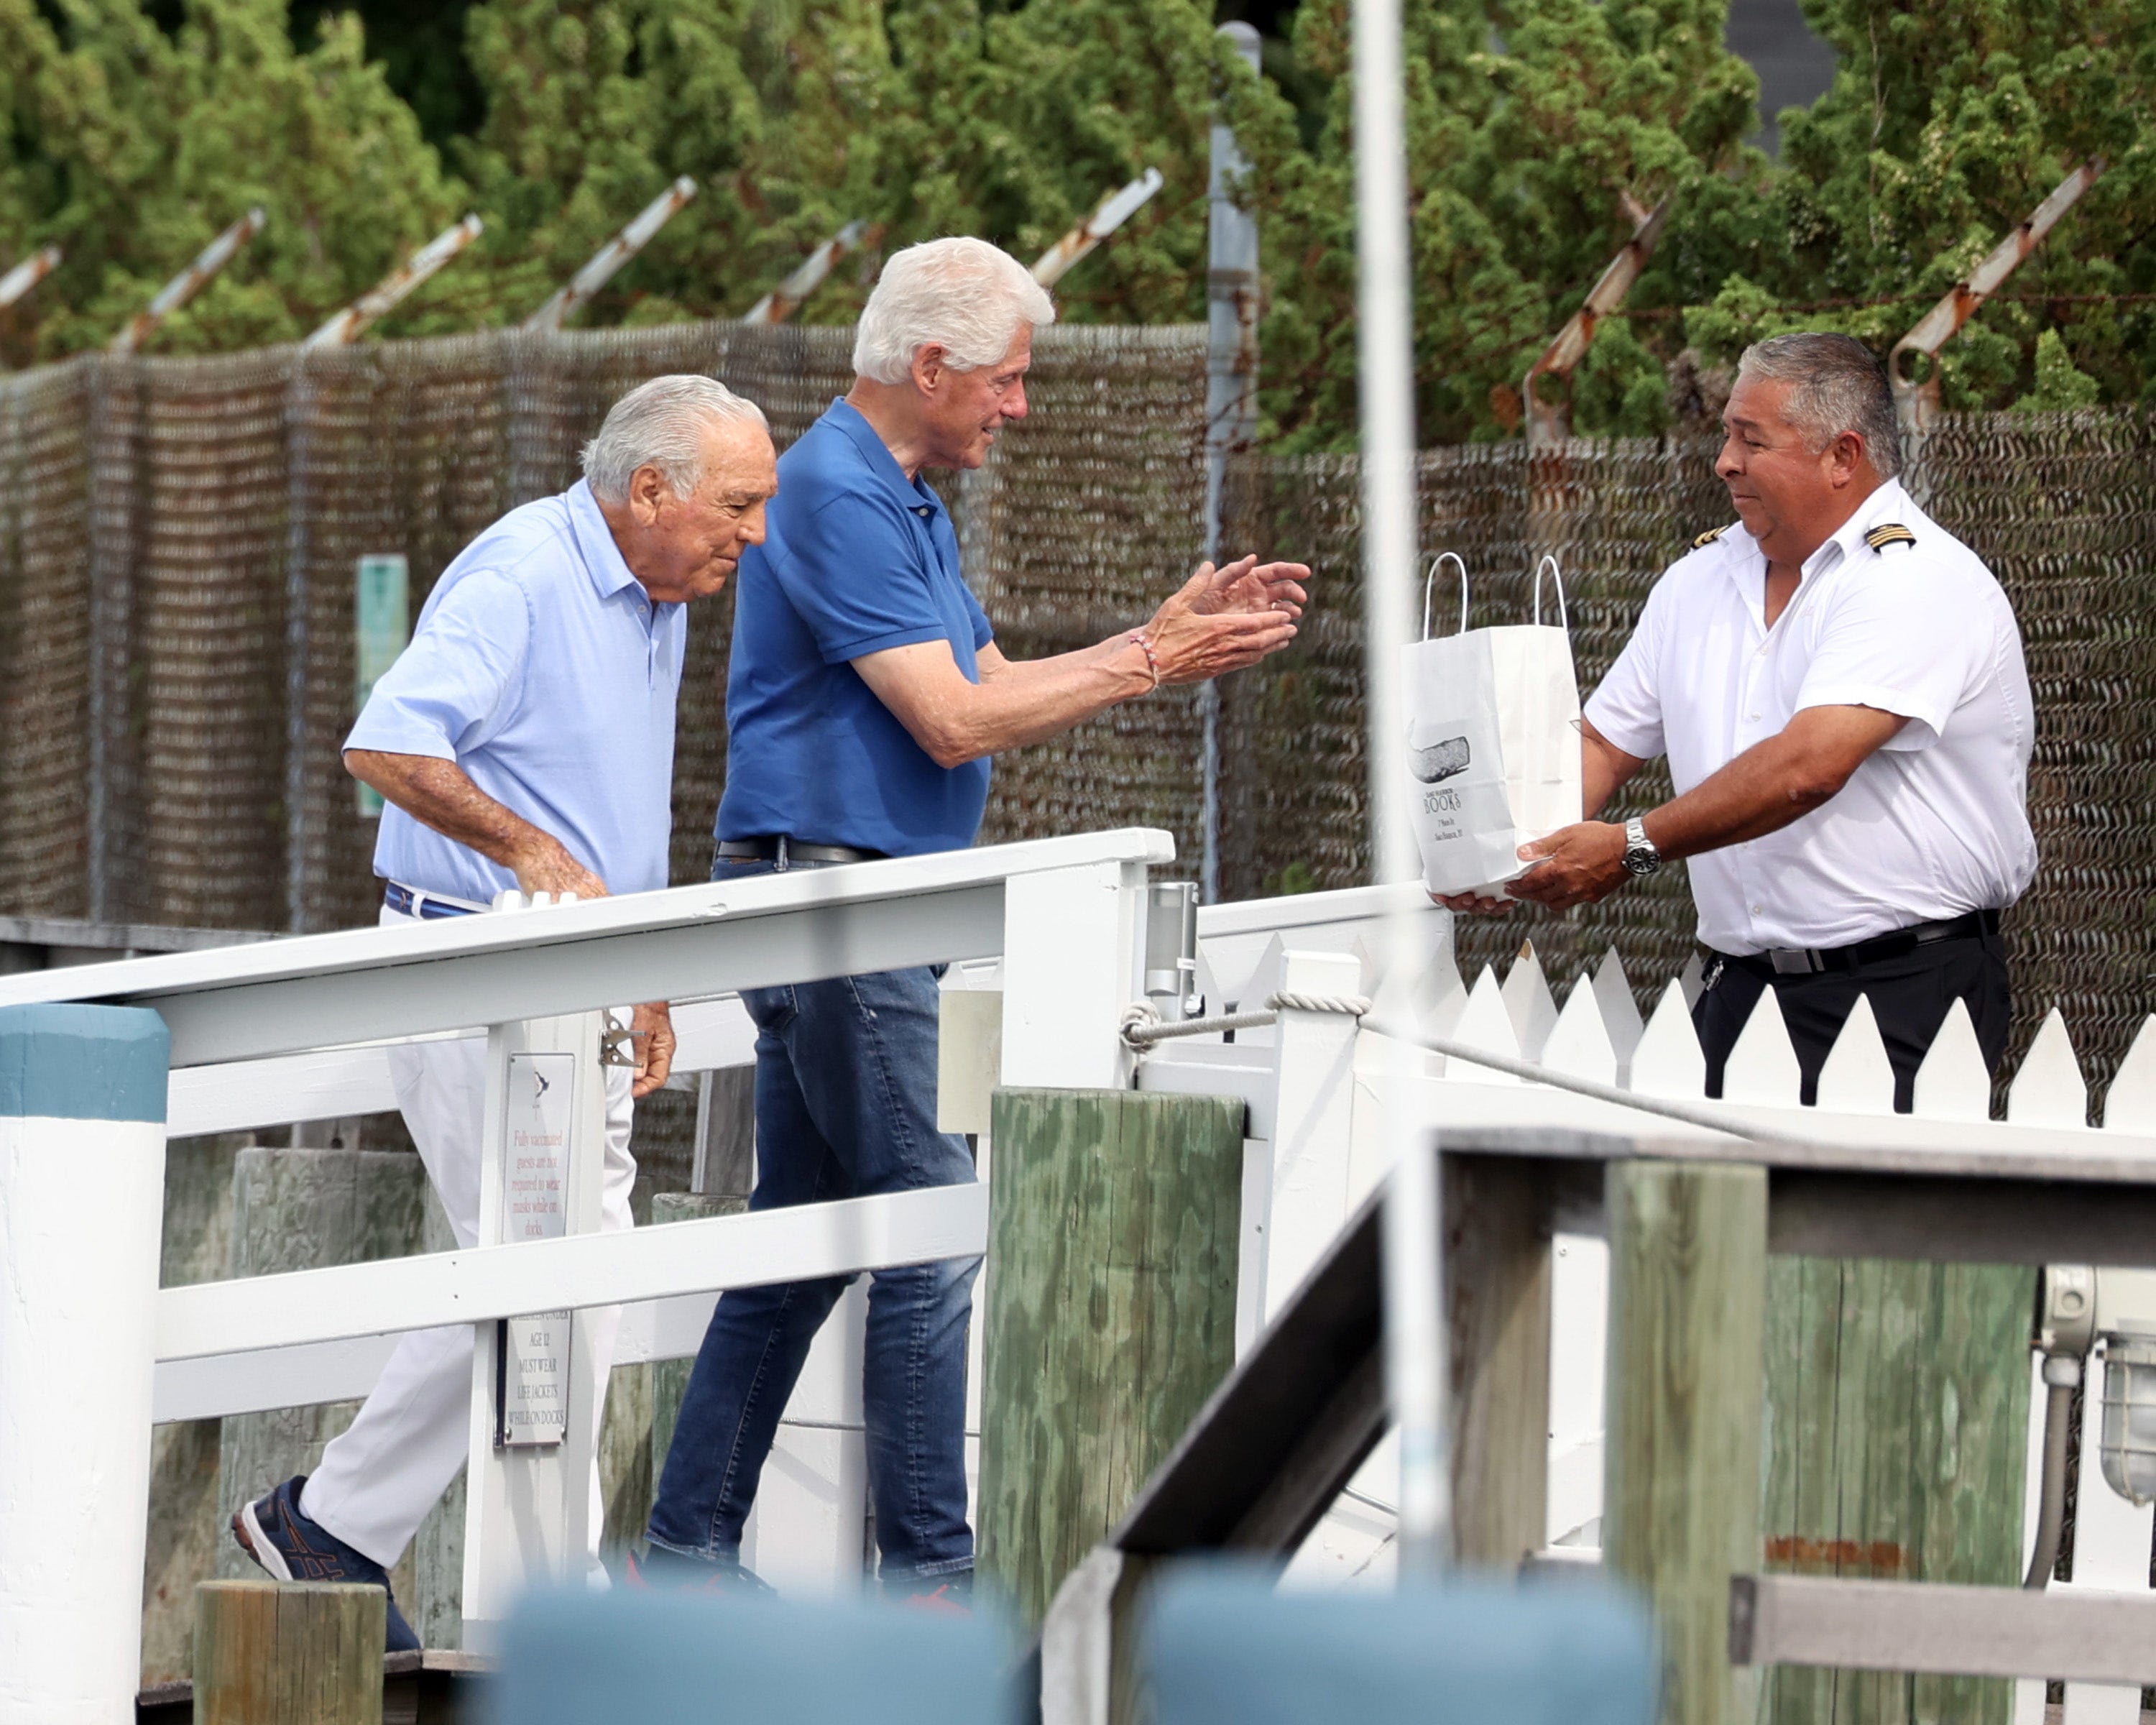 Bill Clinton spotted in Hamptons boarding yacht with Epstein-connected billionaire sugar baron brothers